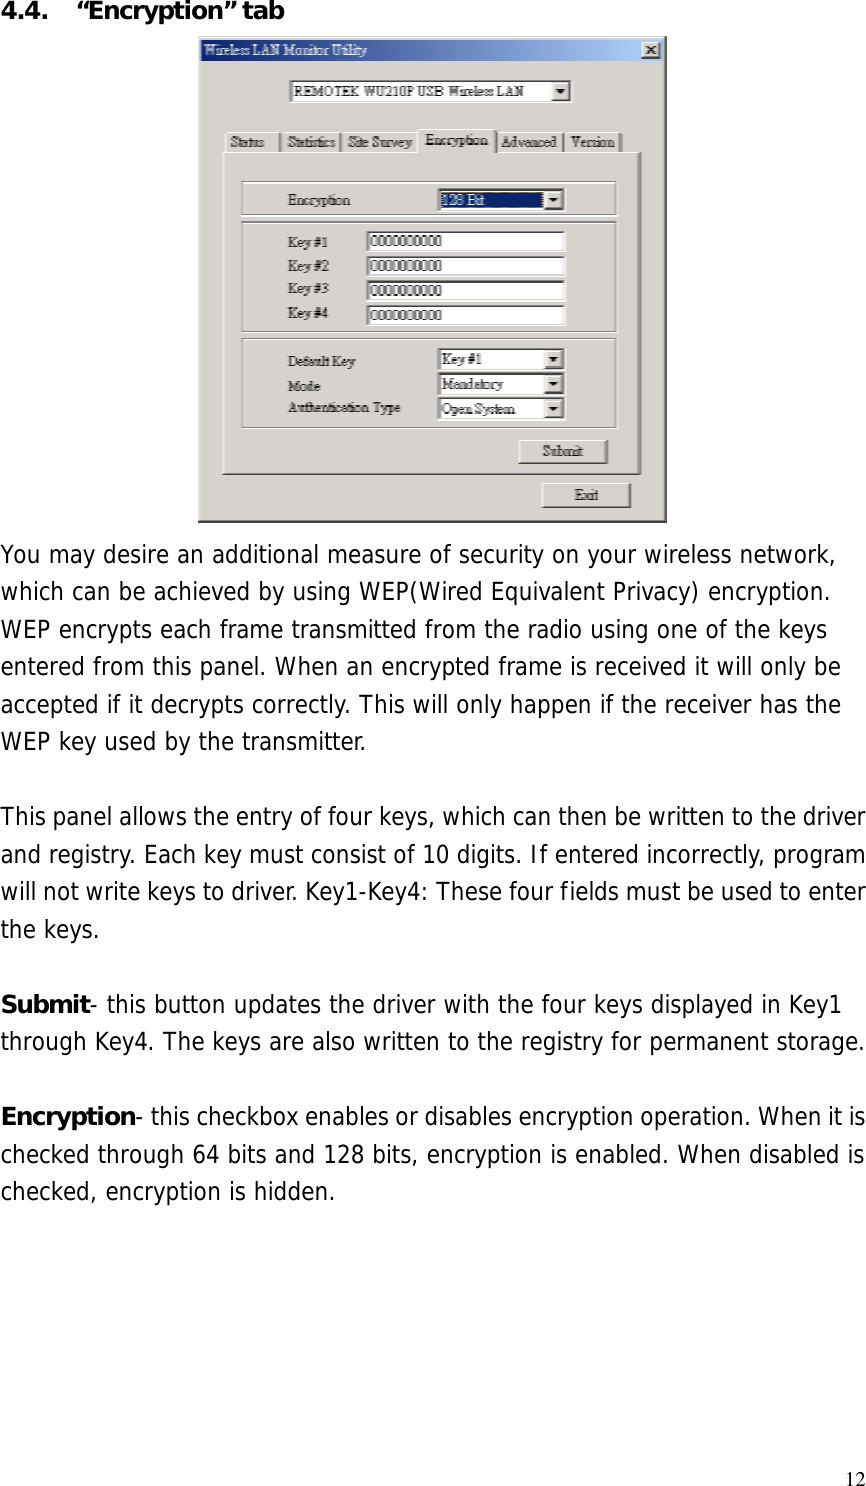  124.4. “Encryption” tab You may desire an additional measure of security on your wireless network, which can be achieved by using WEP(Wired Equivalent Privacy) encryption. WEP encrypts each frame transmitted from the radio using one of the keys entered from this panel. When an encrypted frame is received it will only be accepted if it decrypts correctly. This will only happen if the receiver has the WEP key used by the transmitter.  This panel allows the entry of four keys, which can then be written to the driver and registry. Each key must consist of 10 digits. If entered incorrectly, program will not write keys to driver. Key1-Key4: These four fields must be used to enter the keys.  Submit- this button updates the driver with the four keys displayed in Key1 through Key4. The keys are also written to the registry for permanent storage.  Encryption- this checkbox enables or disables encryption operation. When it is checked through 64 bits and 128 bits, encryption is enabled. When disabled is checked, encryption is hidden. 